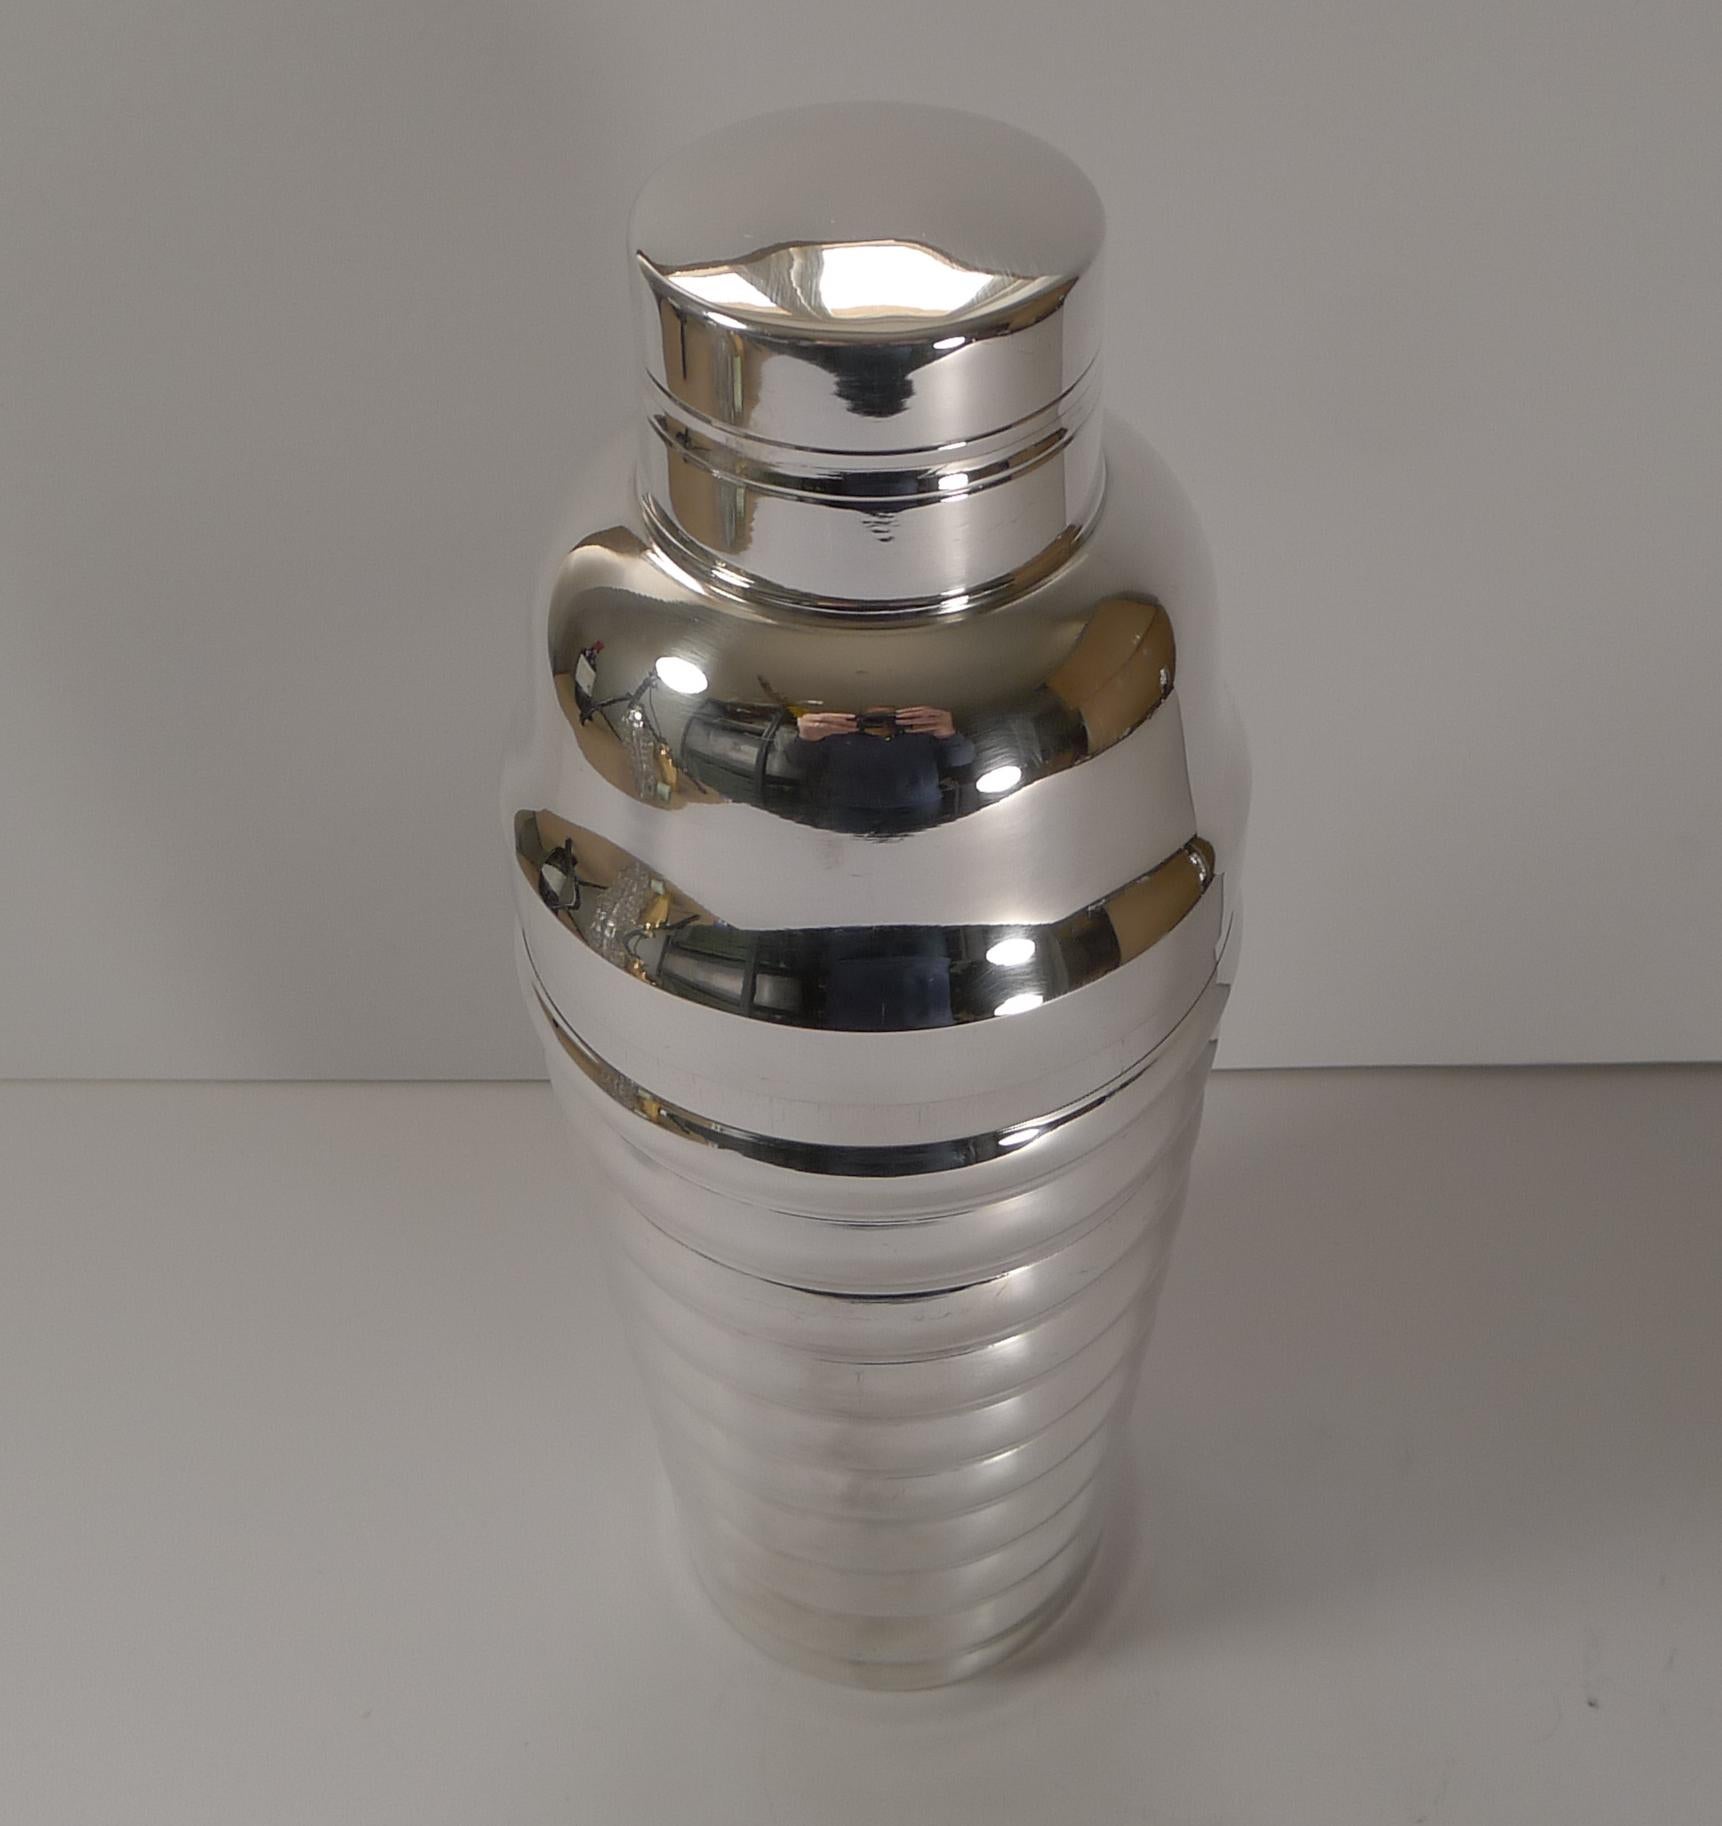 A great looking cocktail shaker, French in origin and in silver plate dating to the Art Deco era, c. 1930's.

A wonderful and unusual design with a fully ribbed body. The underside is signed by the silversmith, a square, two stars and 